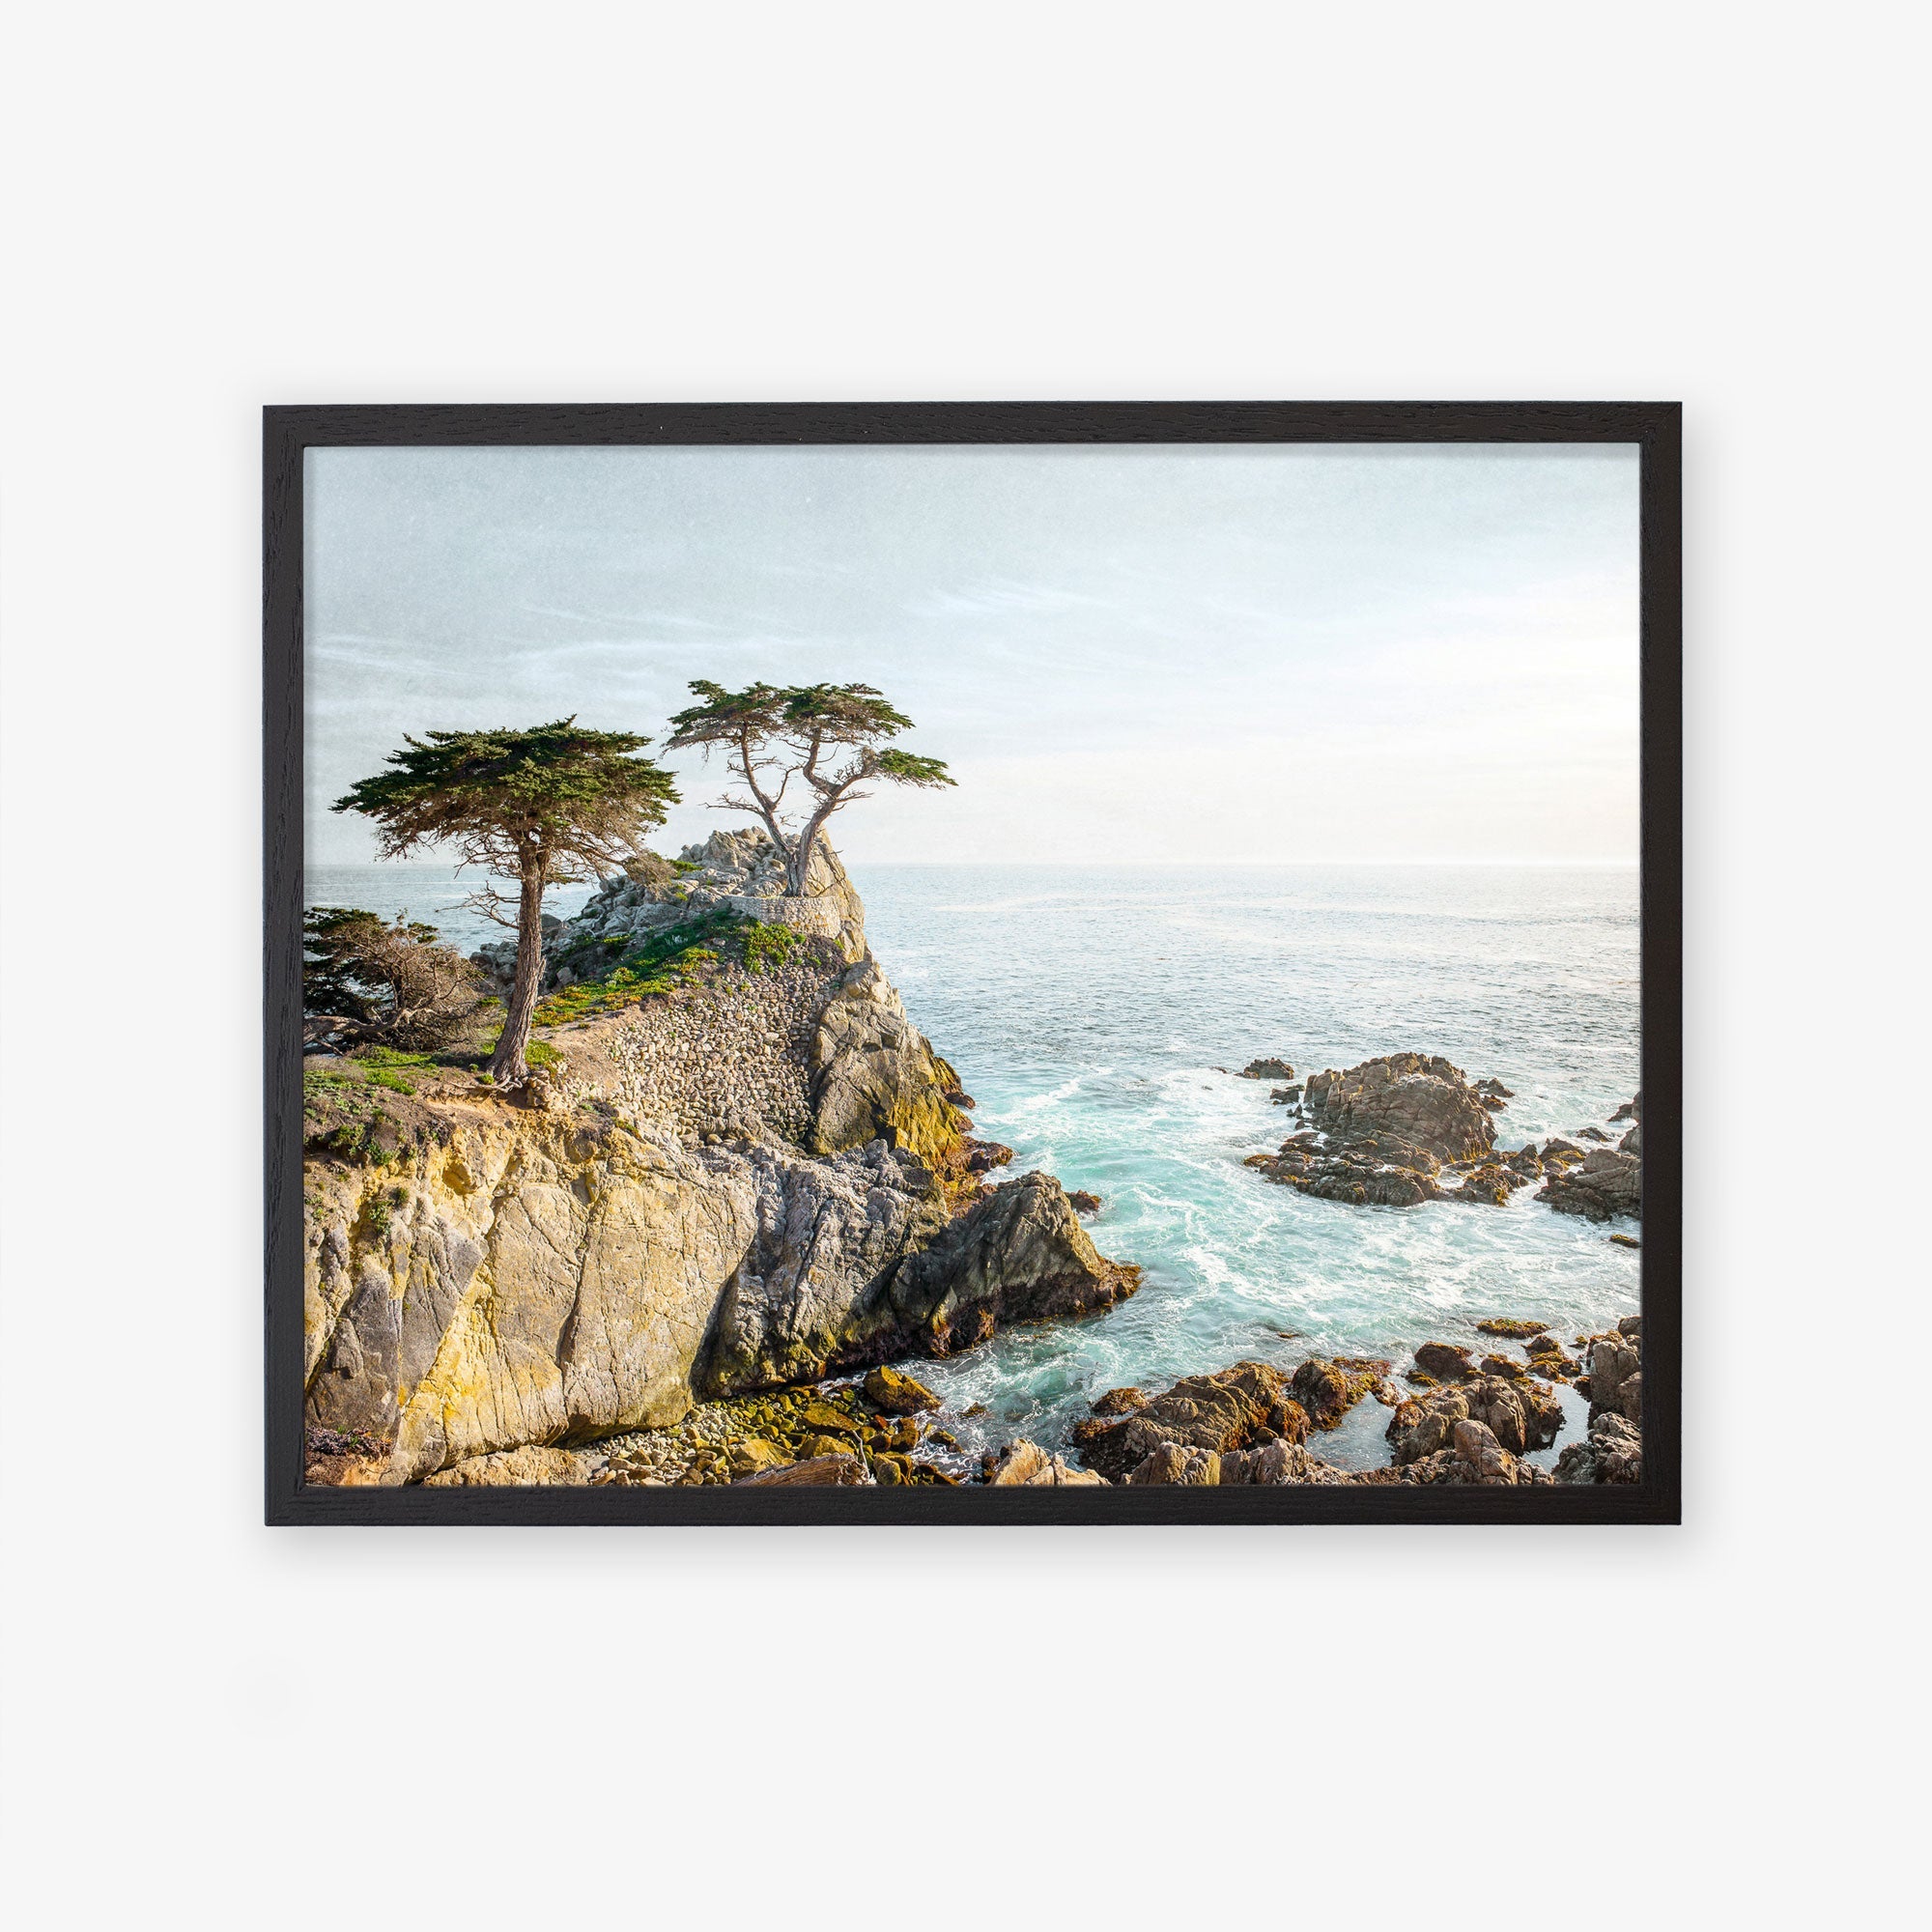 Unframed Offley Green print of a California Coastal landscape at sunset, featuring rugged cliffs with a few trees overlooking a serene sea. The vibrant colors capture the natural beauty and tranquility of the scene.